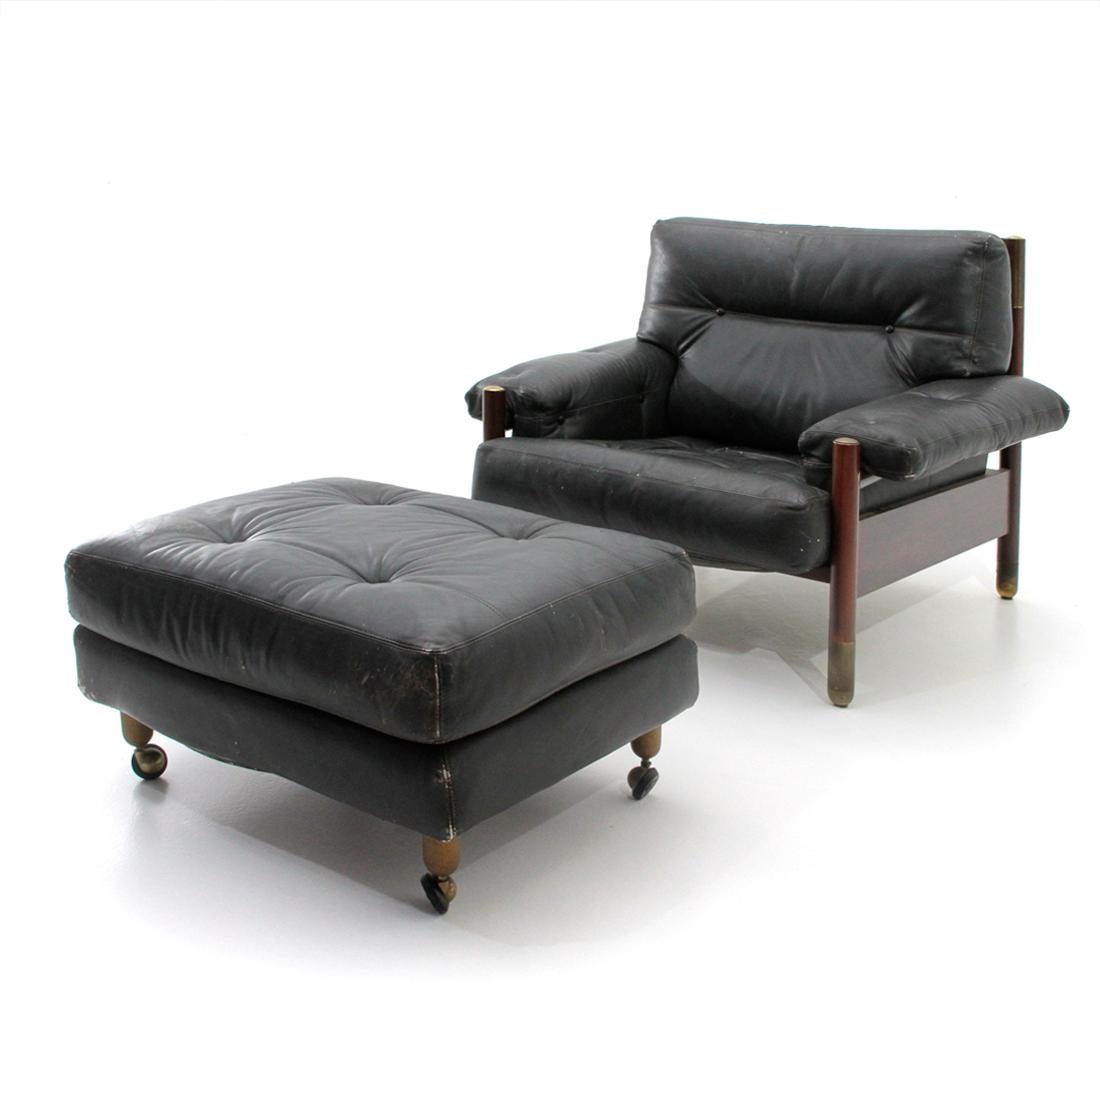 Armchair with ottoman produced by Sormani in the 1950s, designed by Carlo de Carli.
Wooden frame with brass elements and leather straps.
Seat, backrest and armrests, padded and lined in black leather.
Pouf in wood padded and lined in black